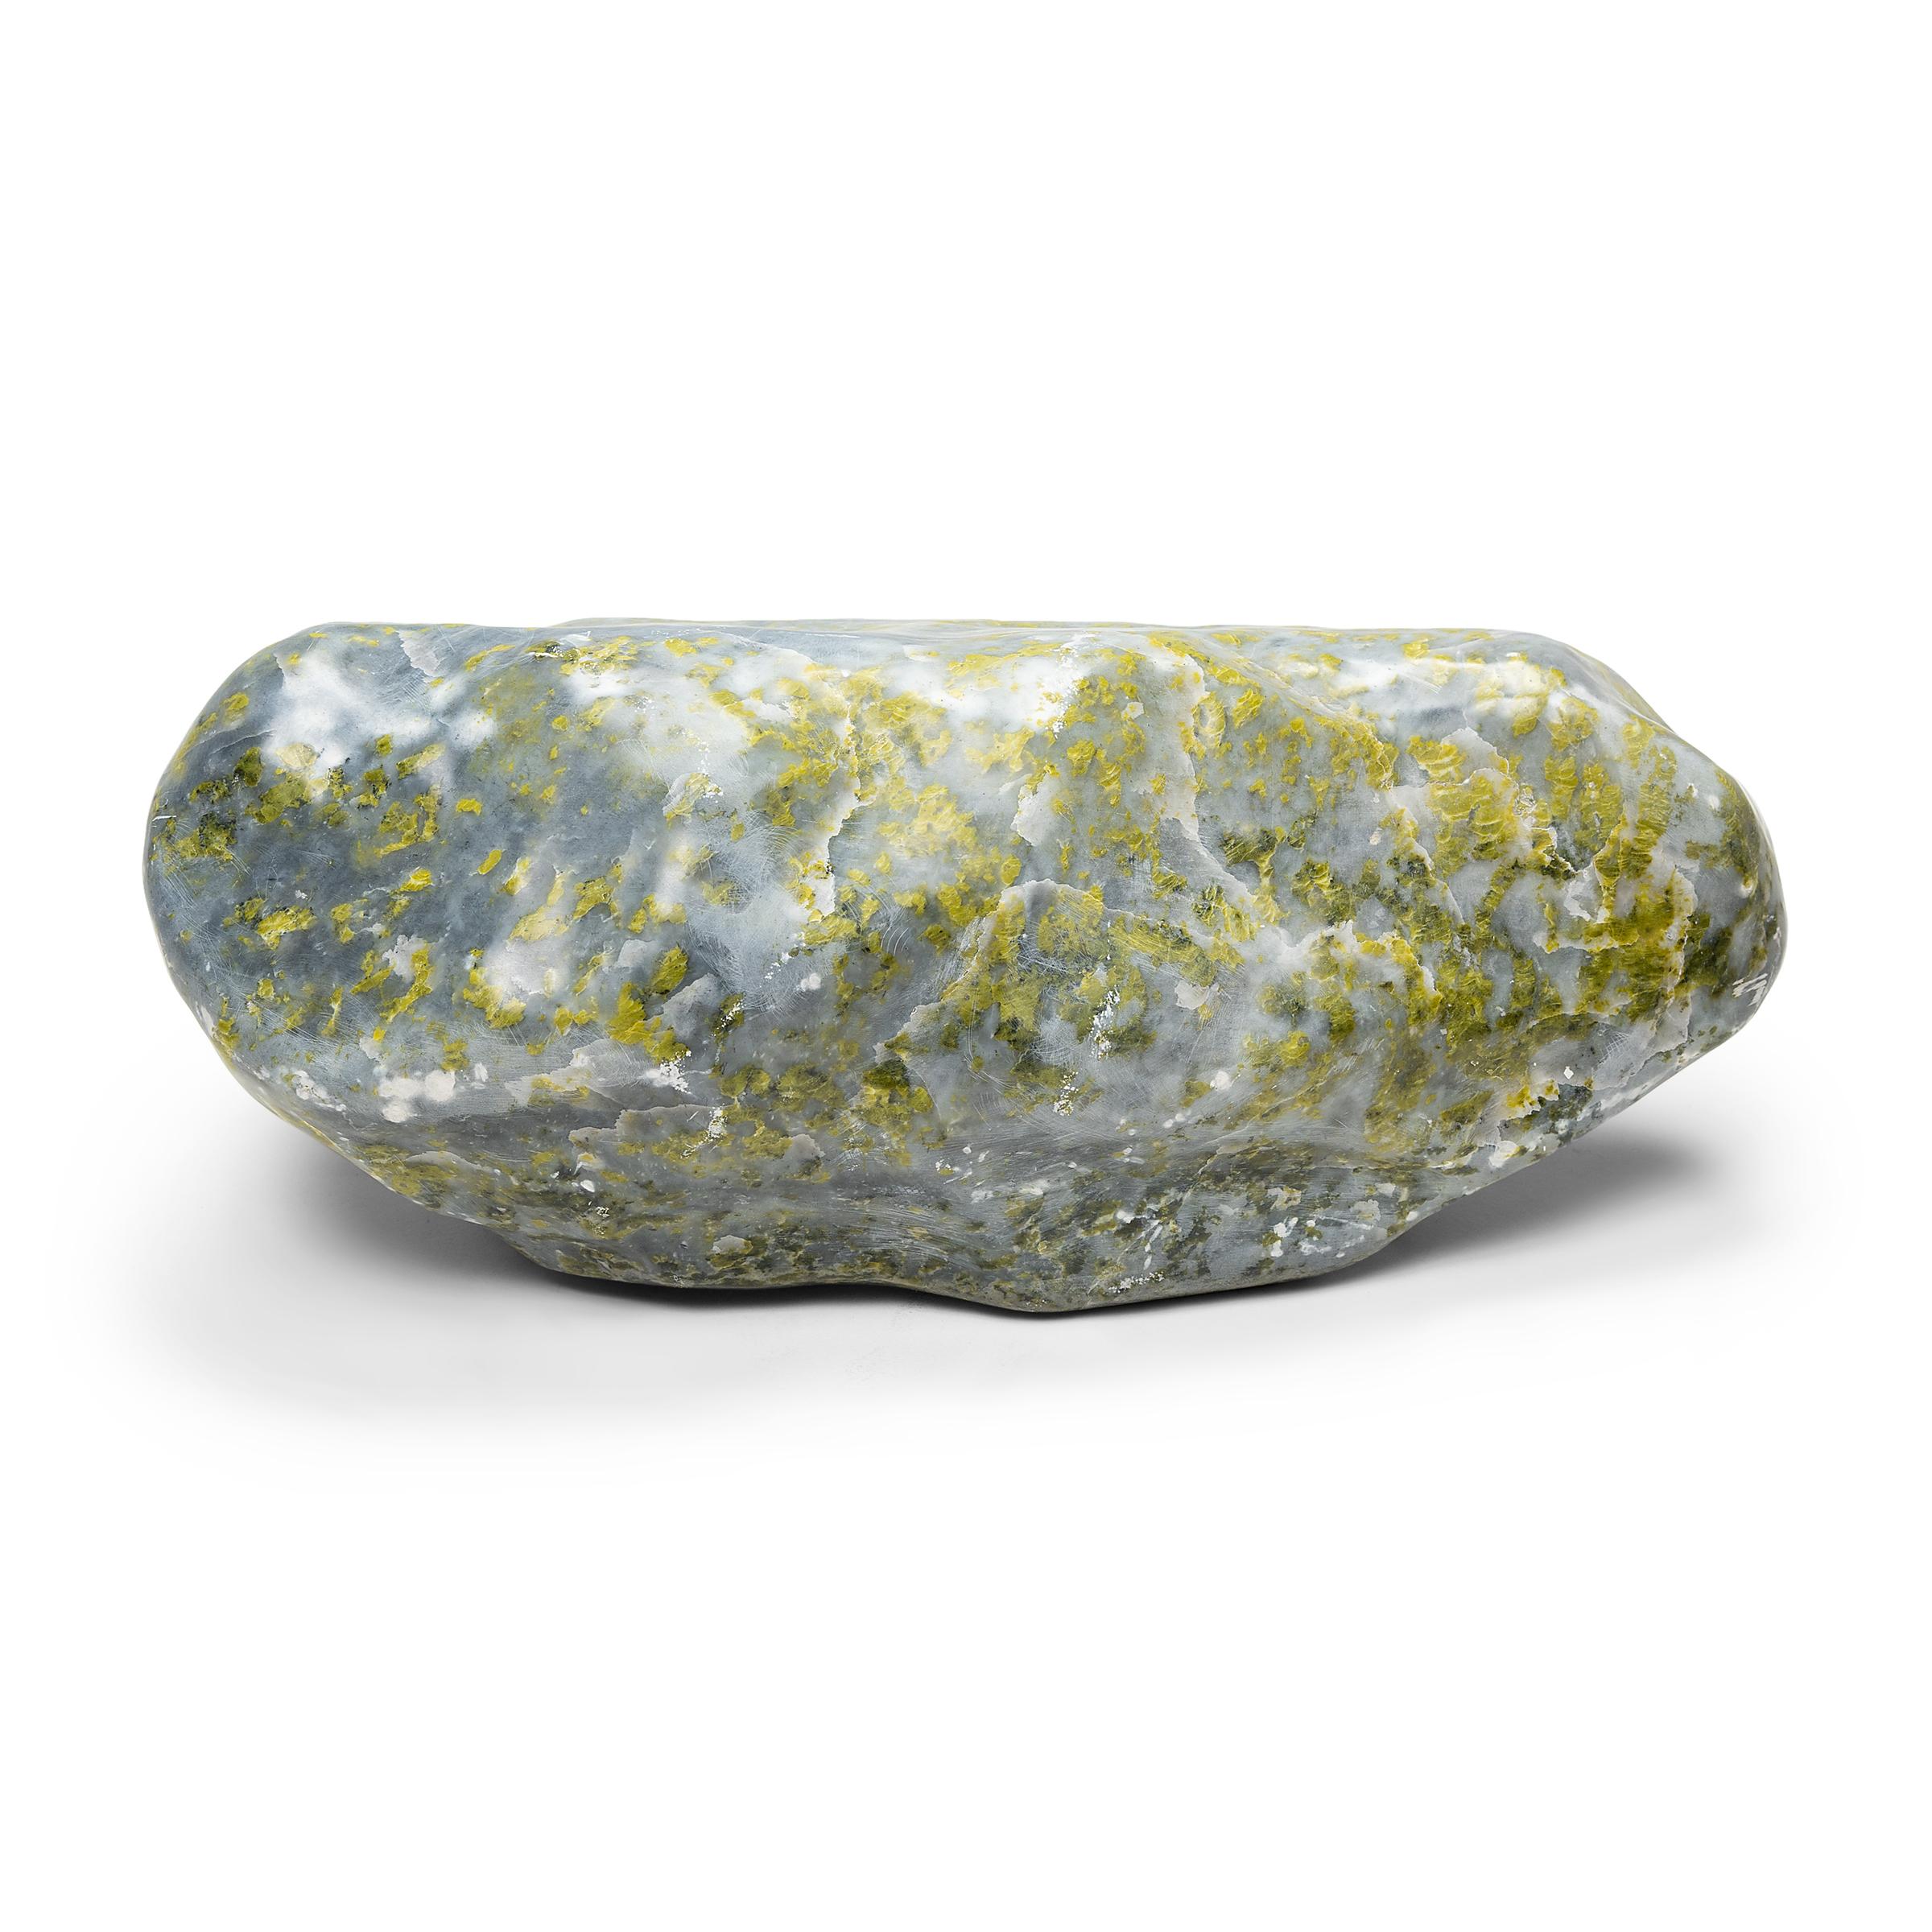 Since ancient times, jade has been sought after for its durability, beauty, and rarity. This unique greenery stone is known as 